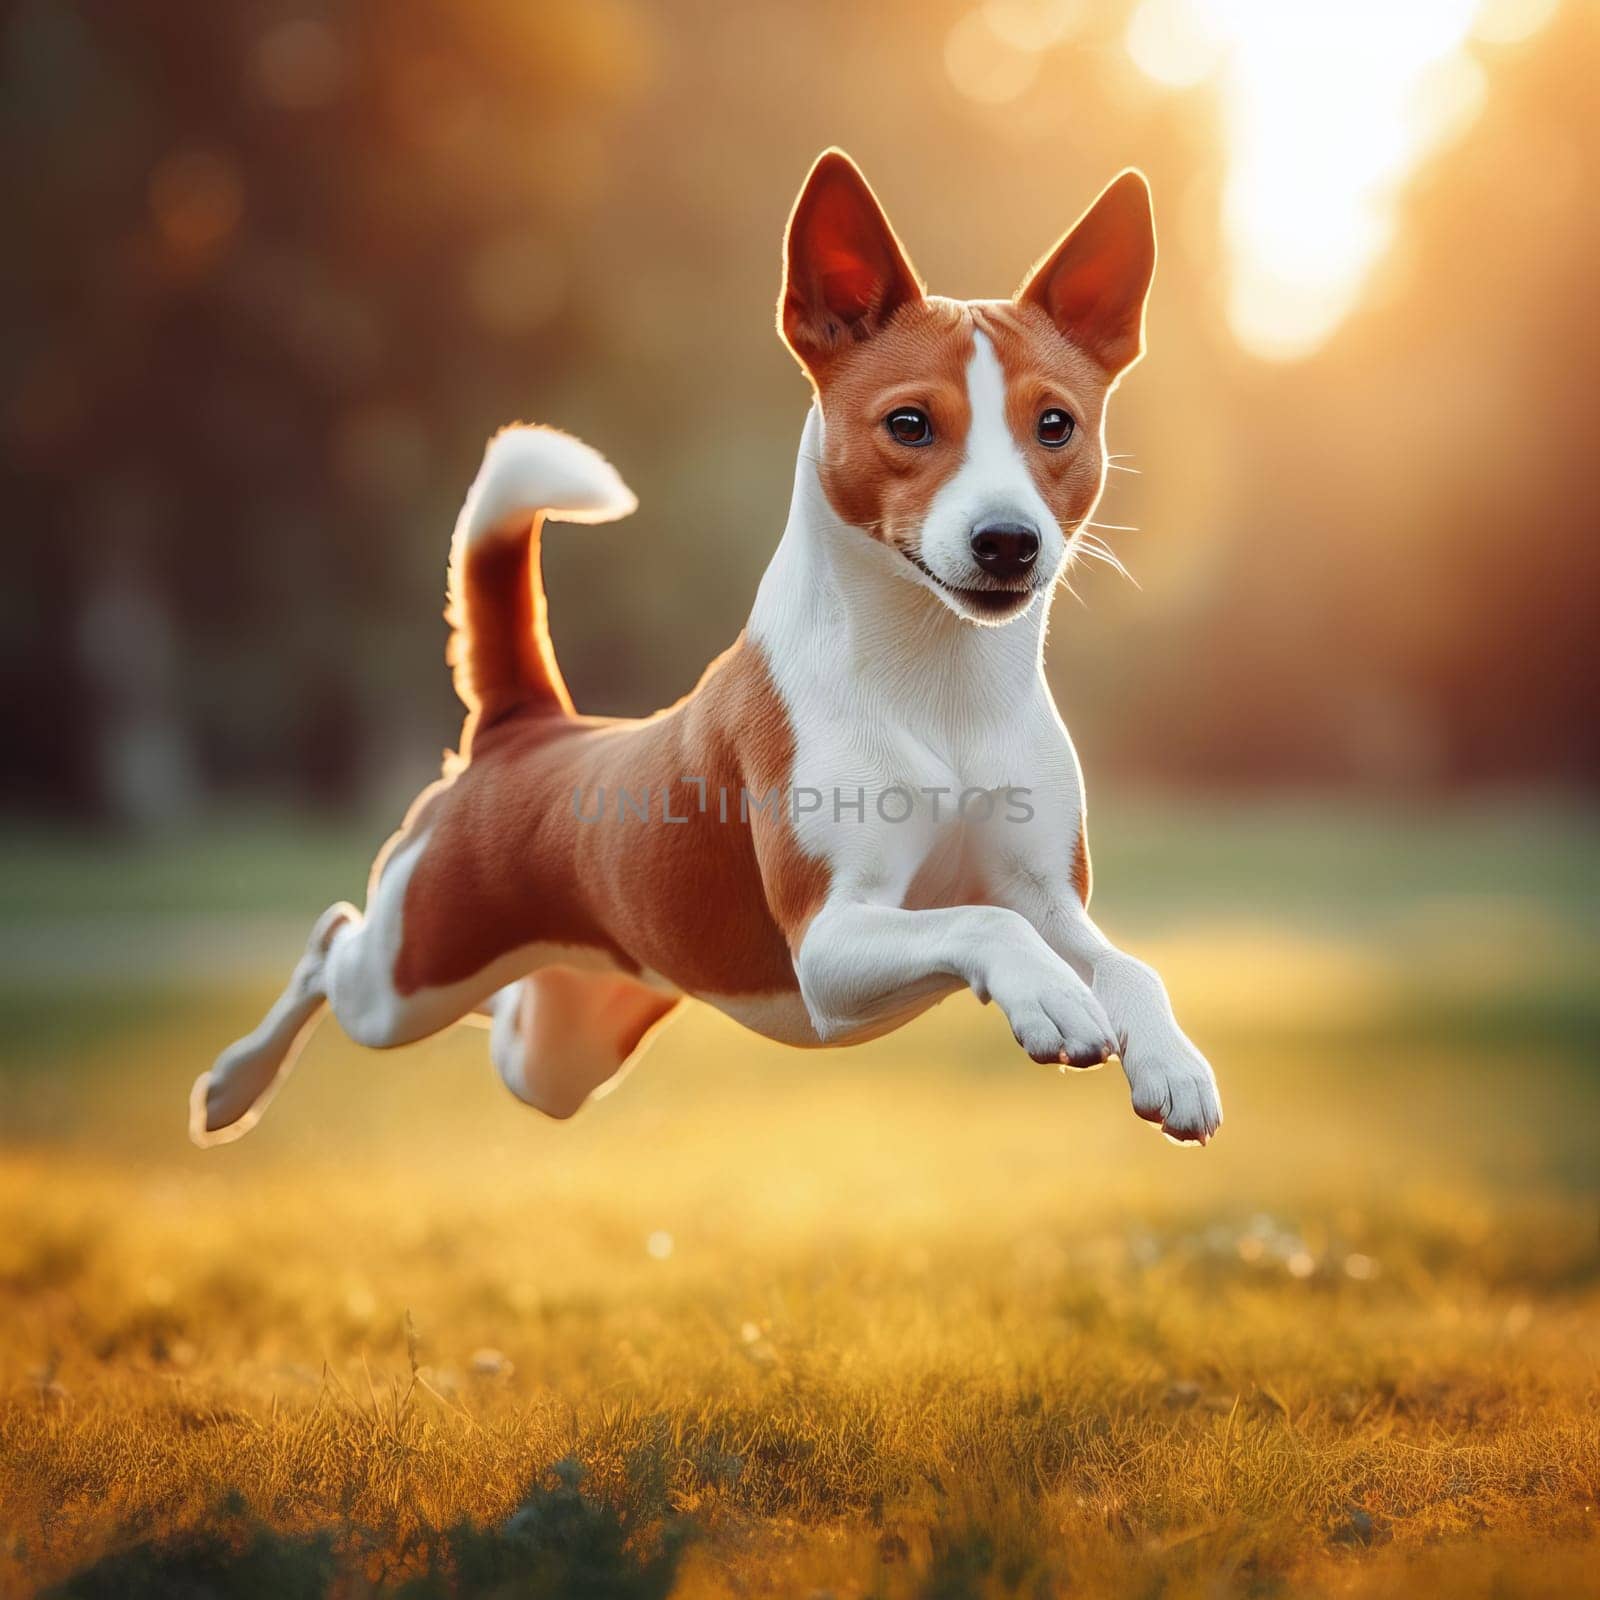 A joyful dog leaps in the air against a sunset backdrop in a park, embodying the spirit of freedom and playfulness. by sfinks